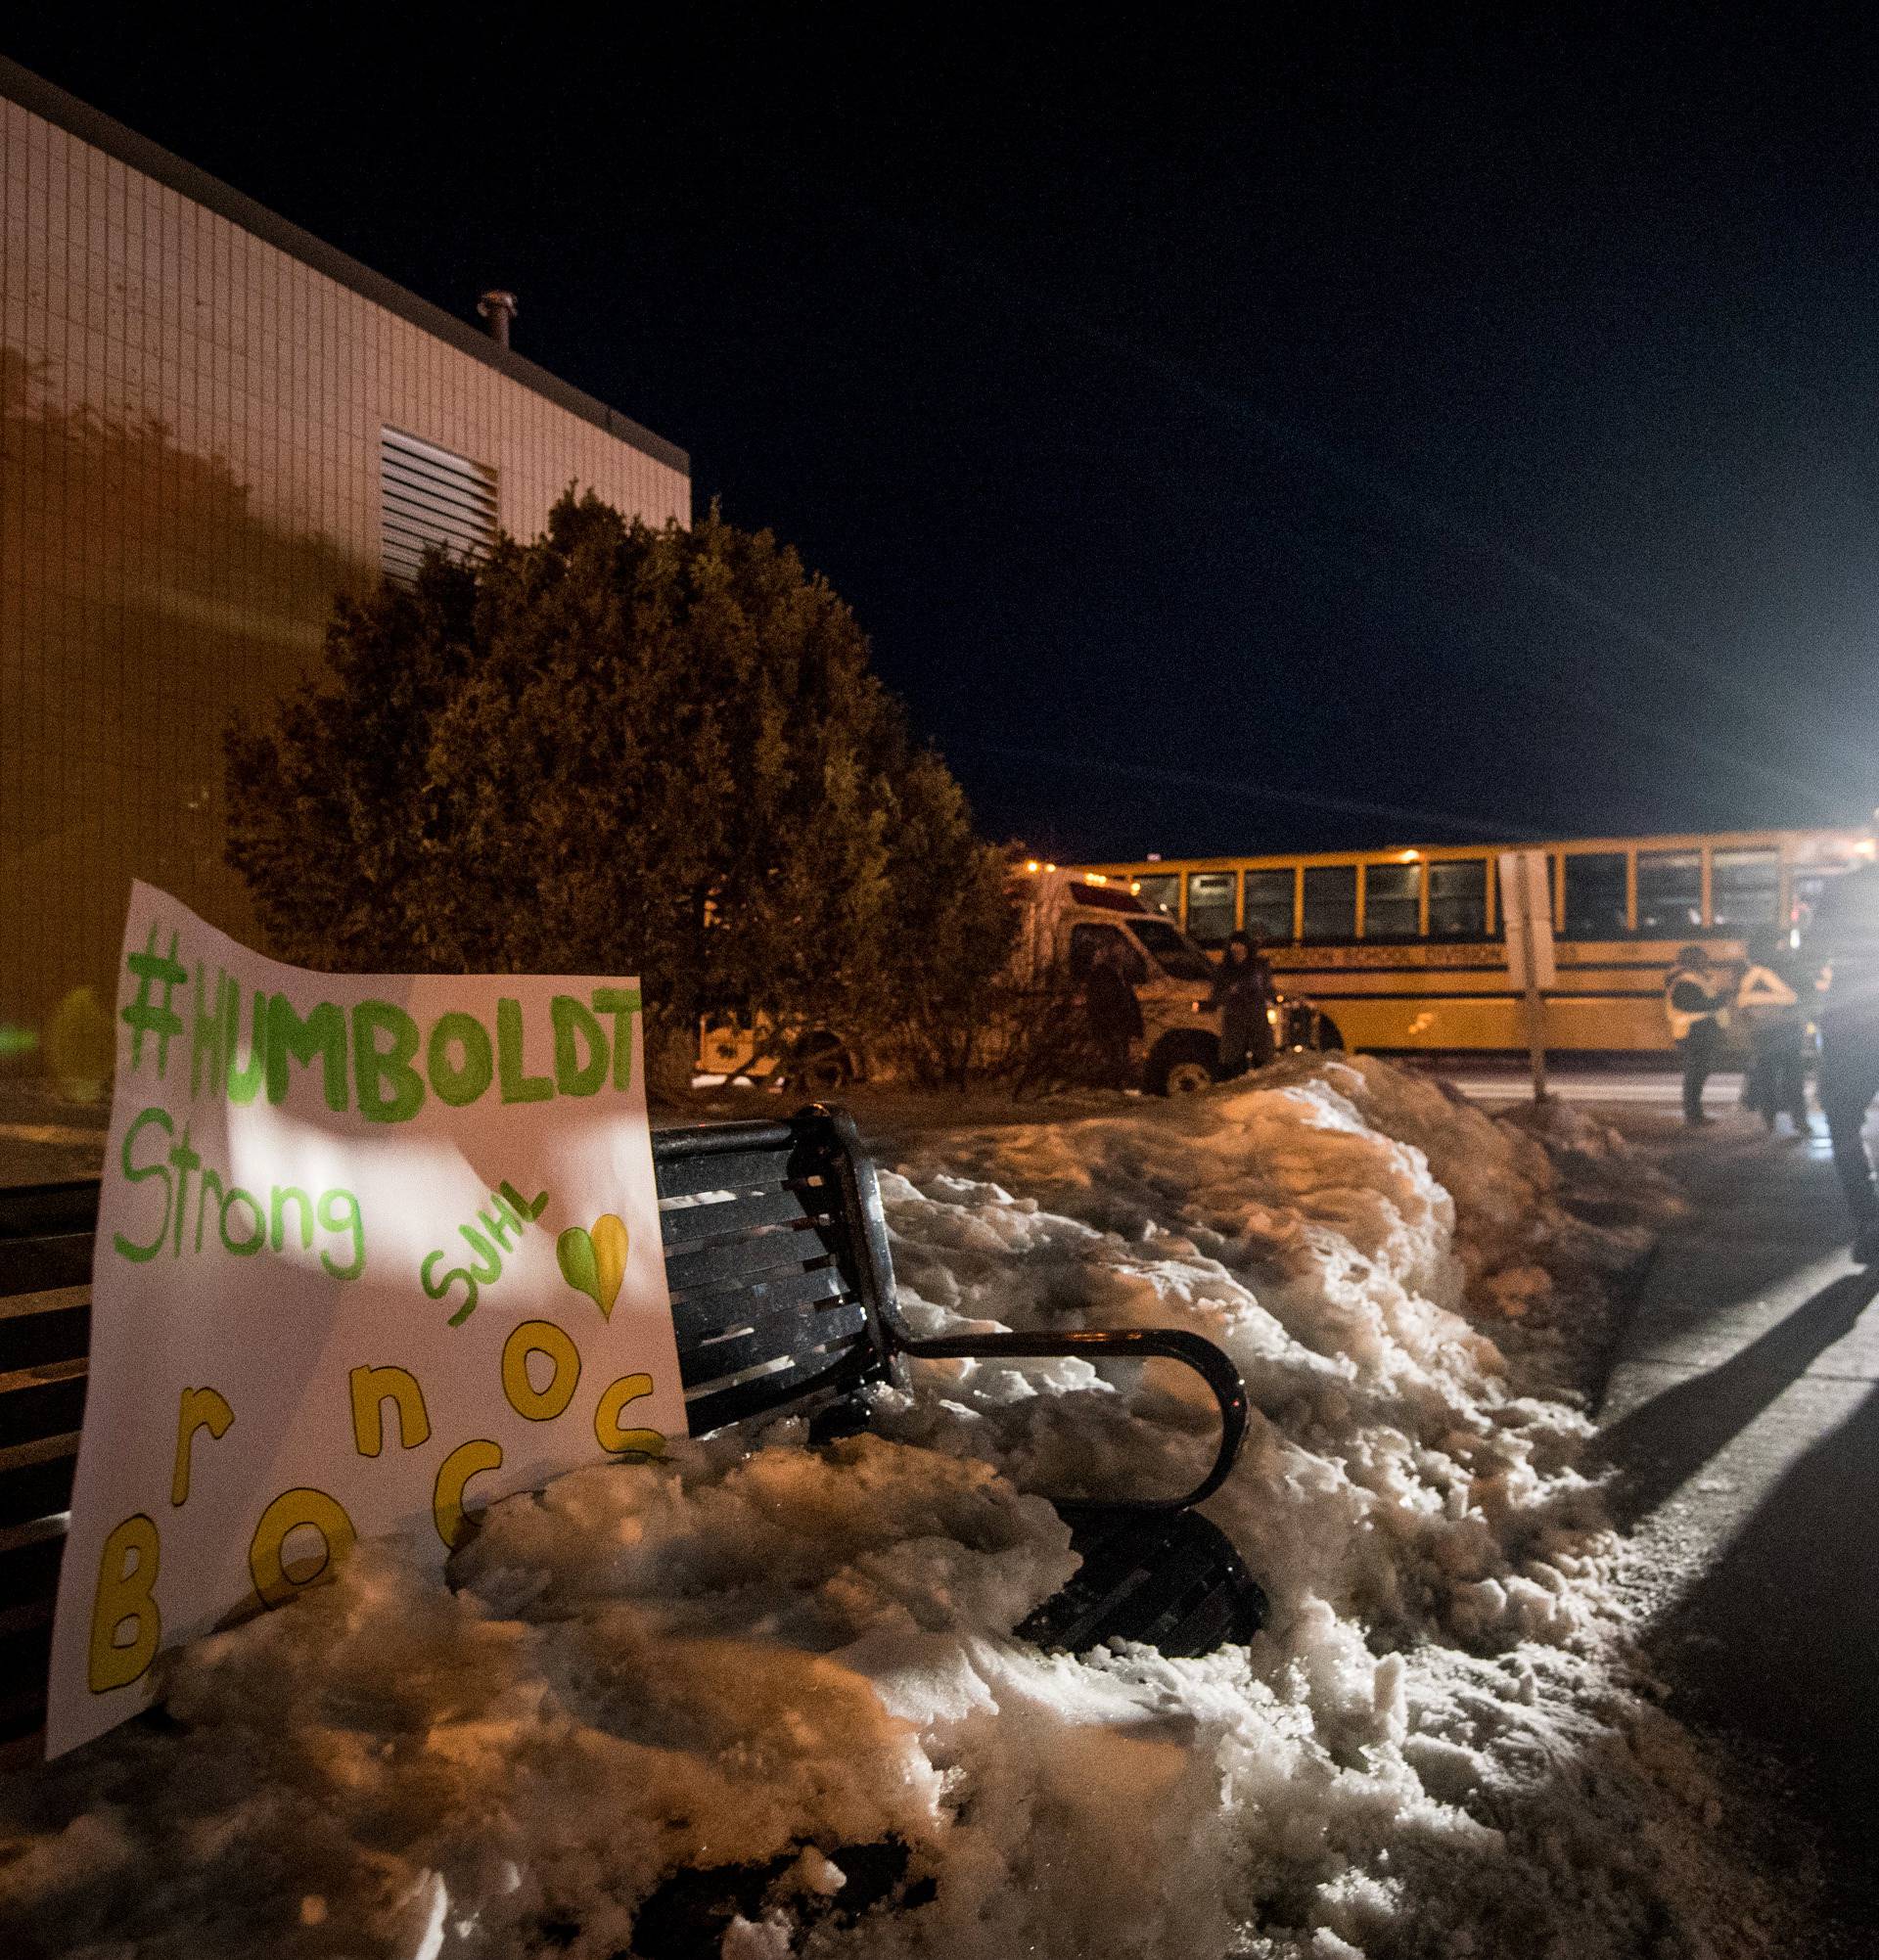 A sign showing support for the victims and families of a fatal bus crash is on display as members of the community leave a vigil for the Humboldt Broncos